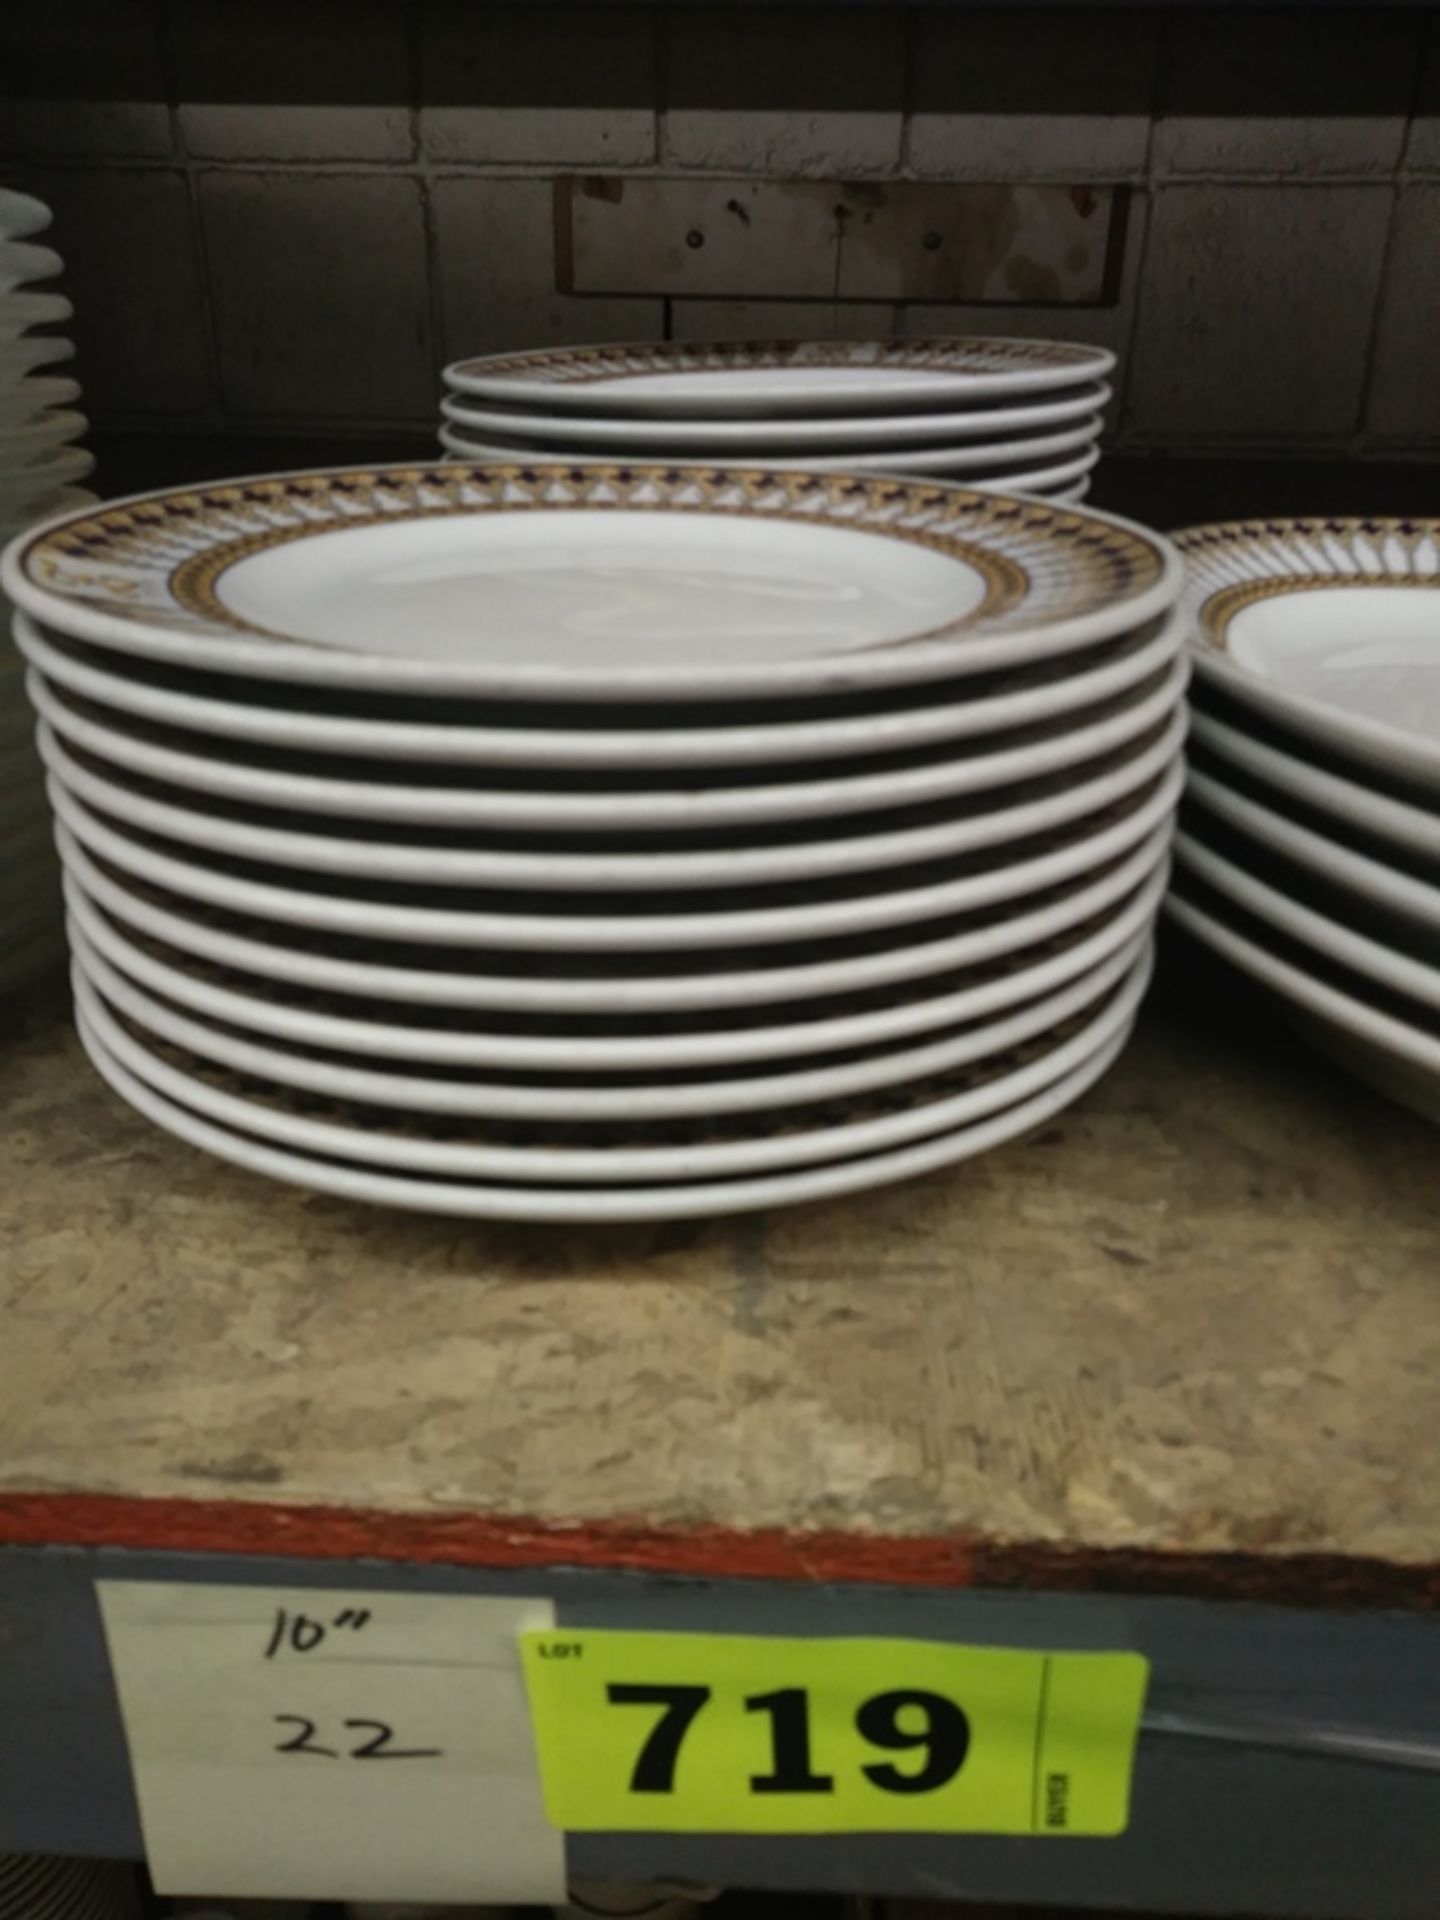 NEW 10" SCHONWALD PLATE (INCLUDES QTY: 22)